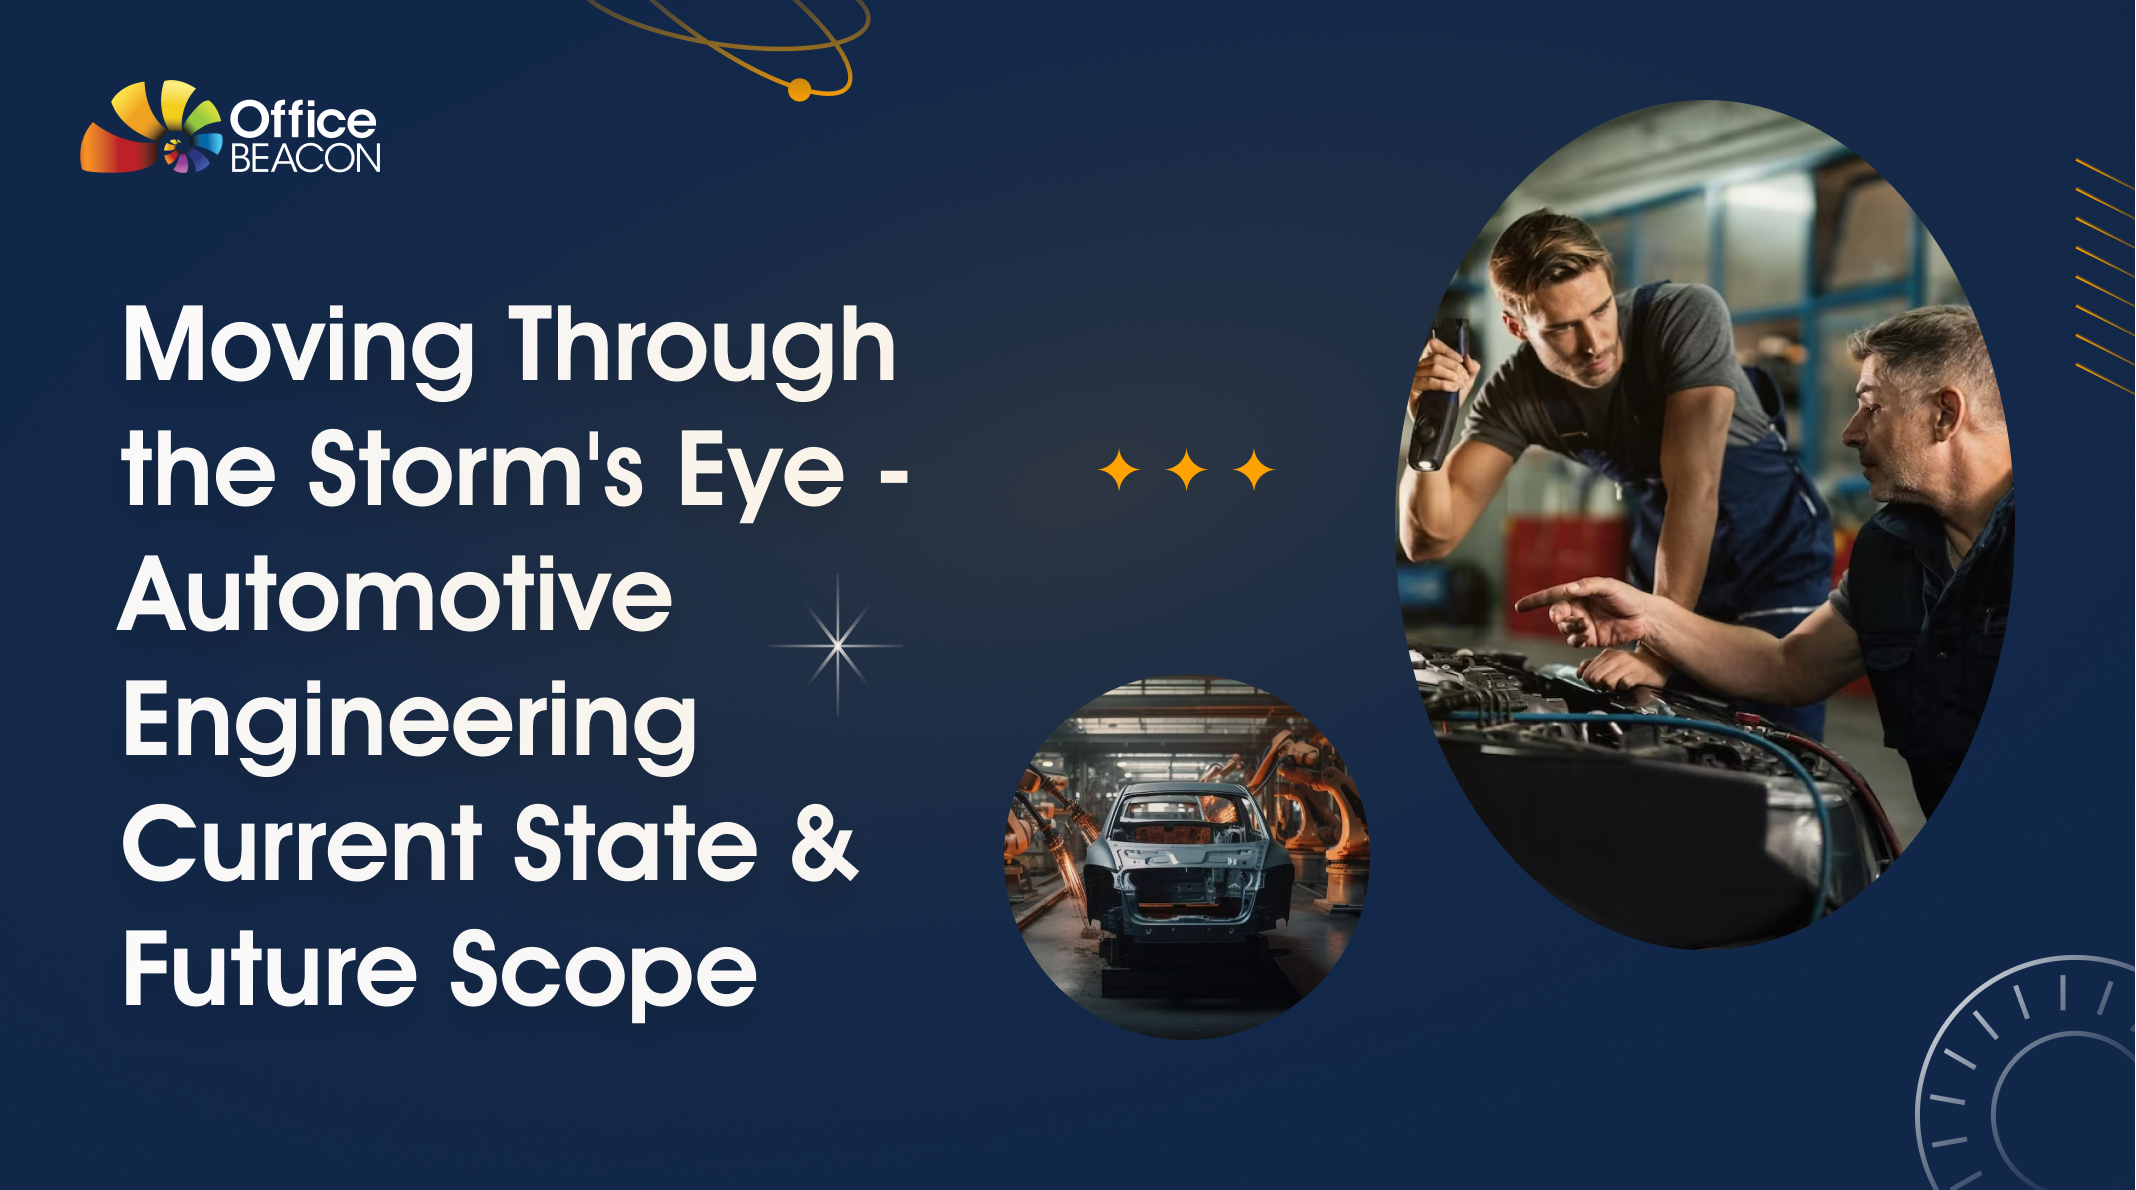 Moving Through the Storm’s Eye – Automotive Engineering Current State & Future Scope